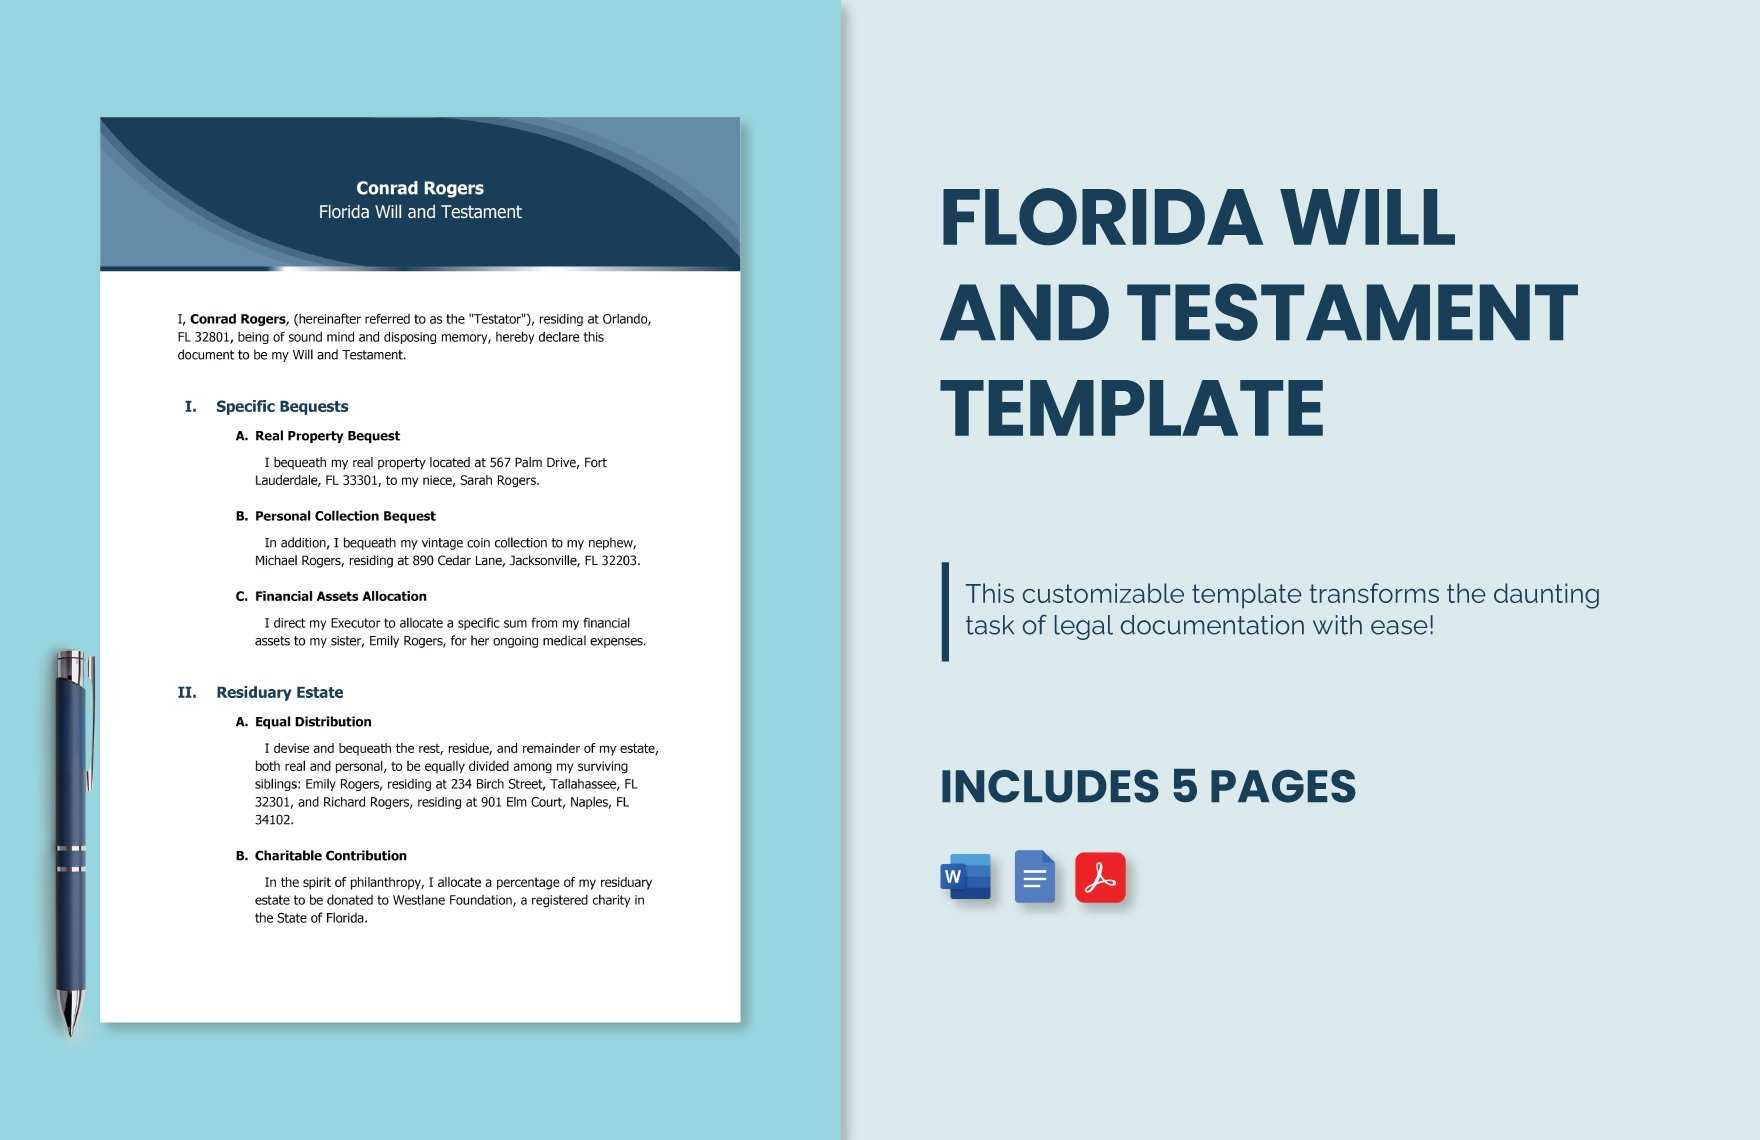 Florida Will and Testament Template